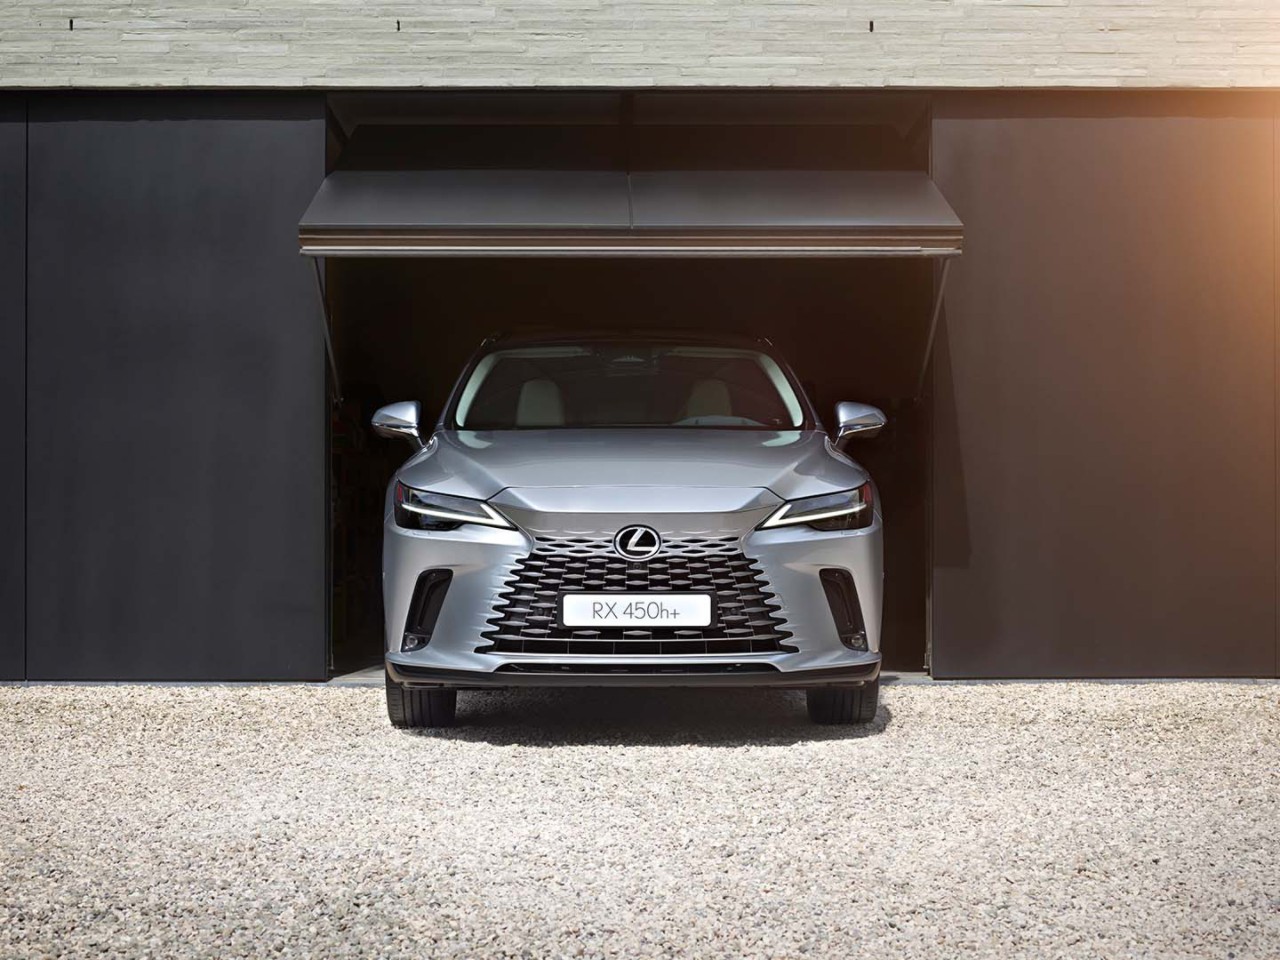 The Lexus UX driving in a town location